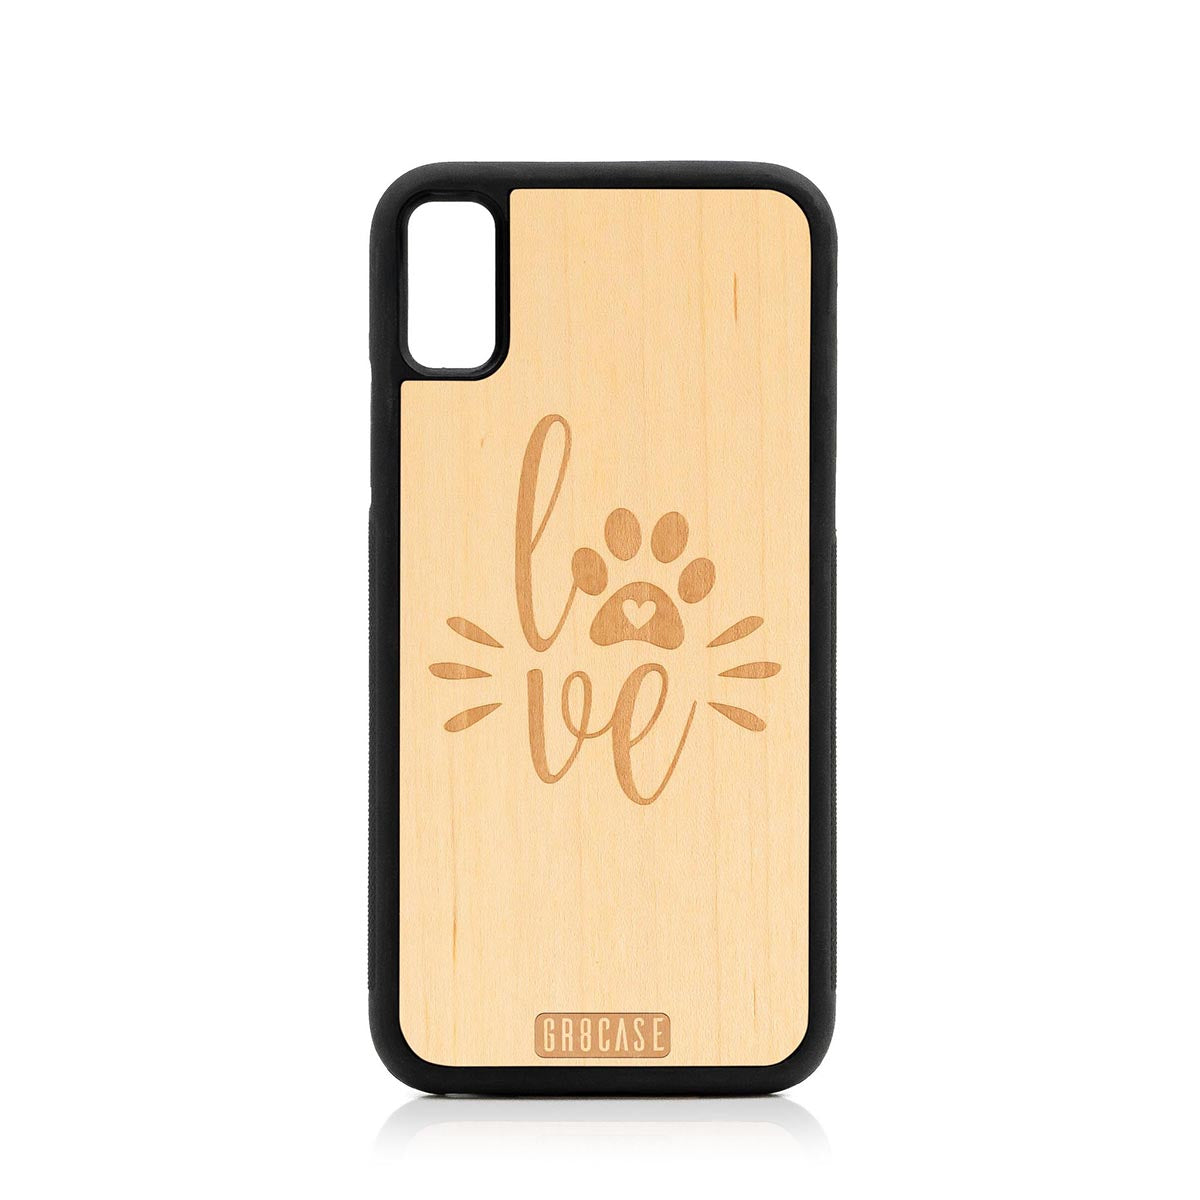 Paw Love Design Wood Case For iPhone XR by GR8CASE